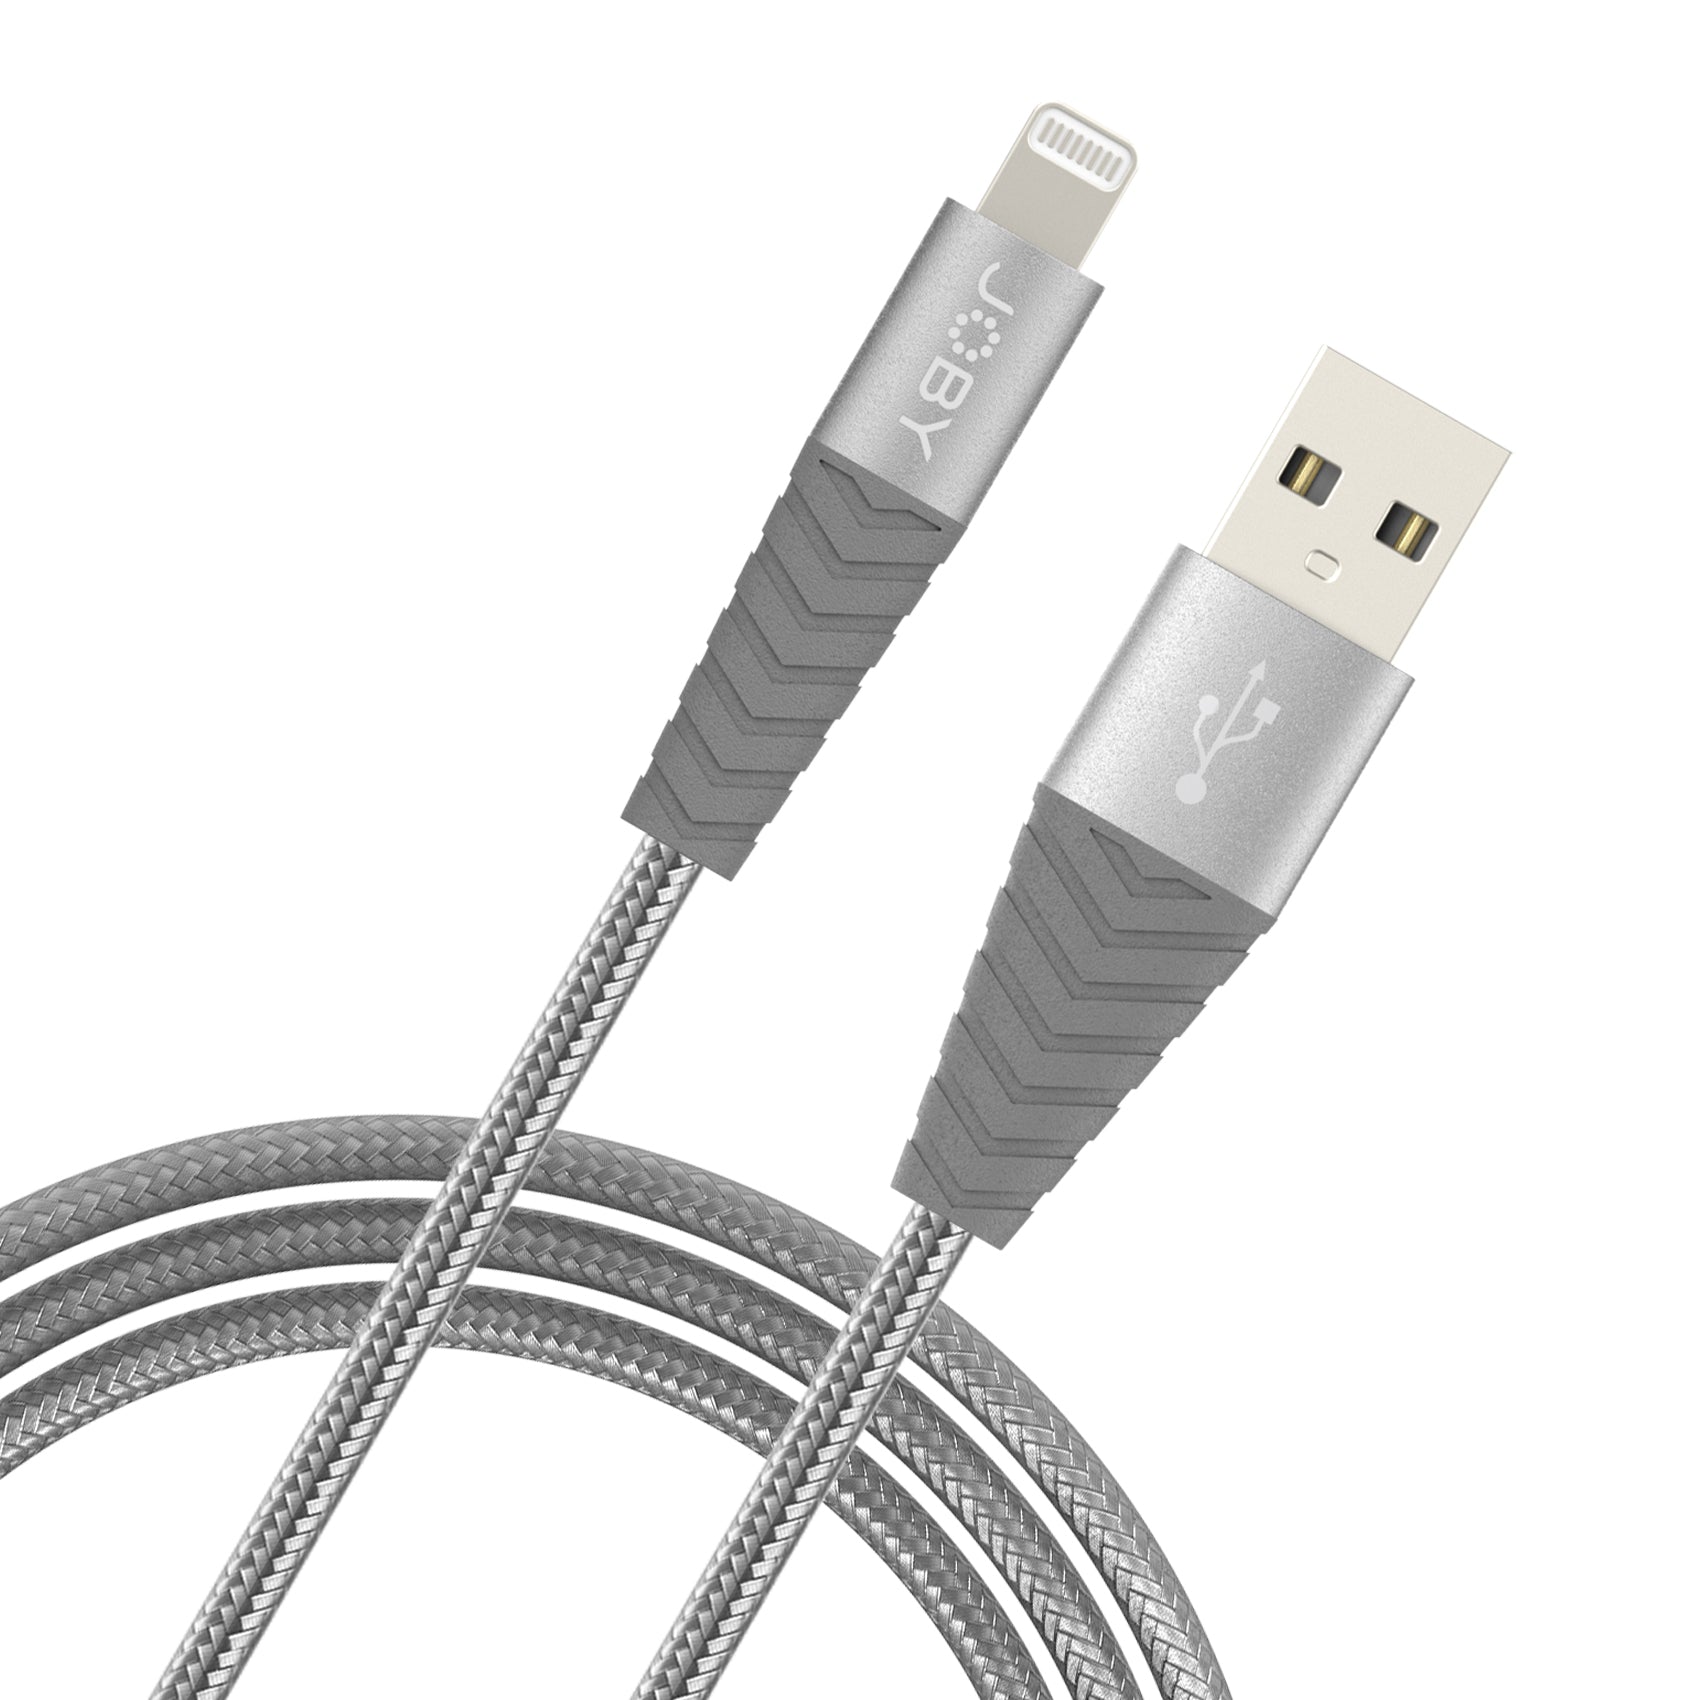 Joby Charge and Sync Lightning Cable - Space Grey - 3m/10ft